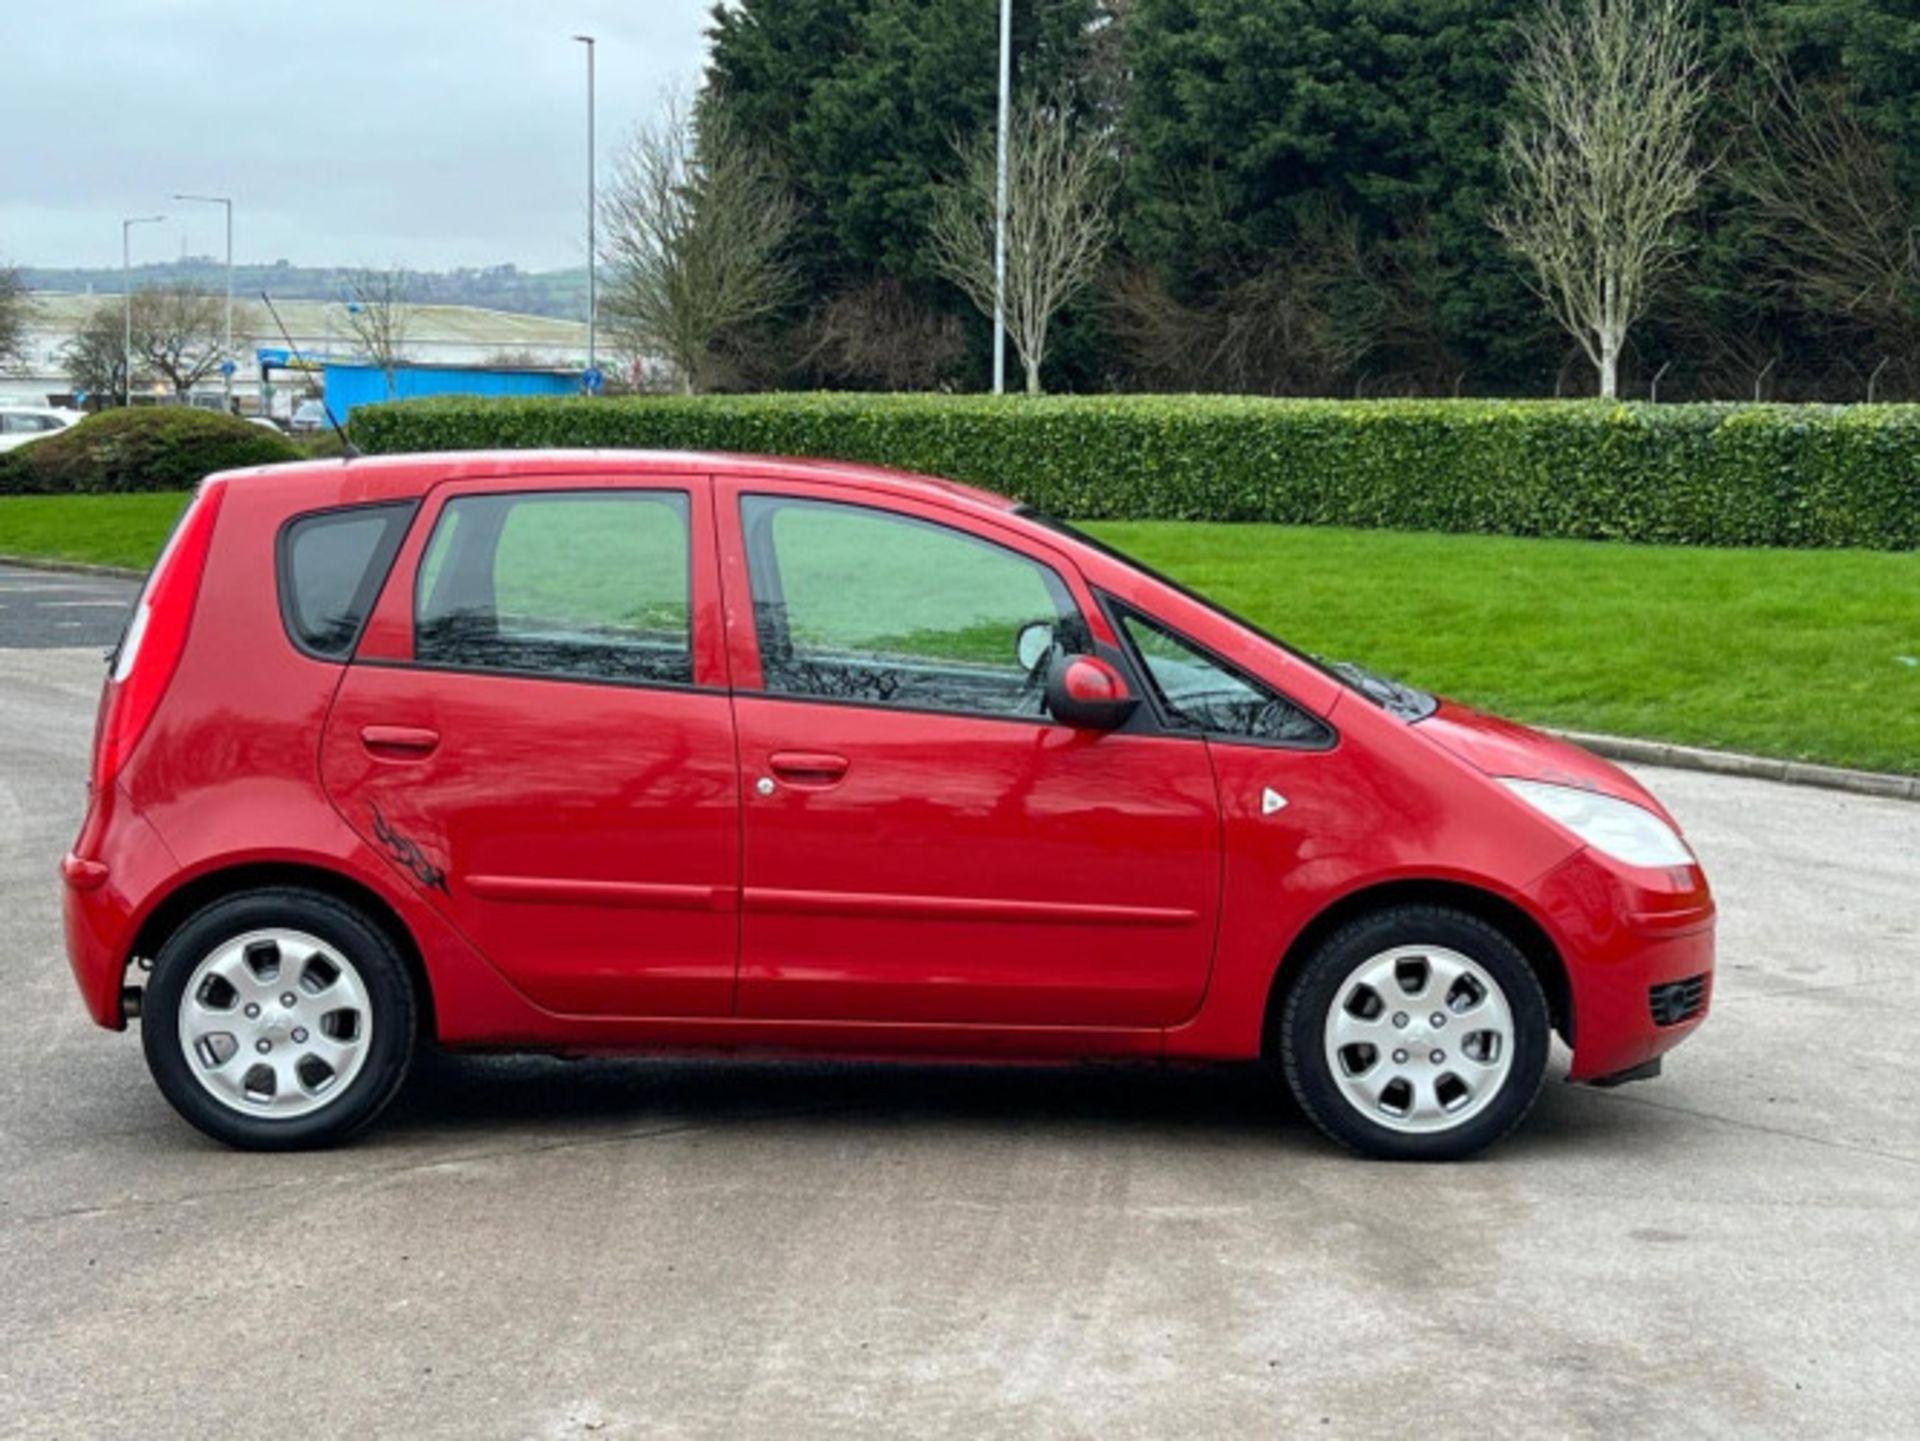 2007 MITSUBISHI COLT 1.5 DI-D DIESEL AUTOMATIC >>--NO VAT ON HAMMER--<< - Image 123 of 127